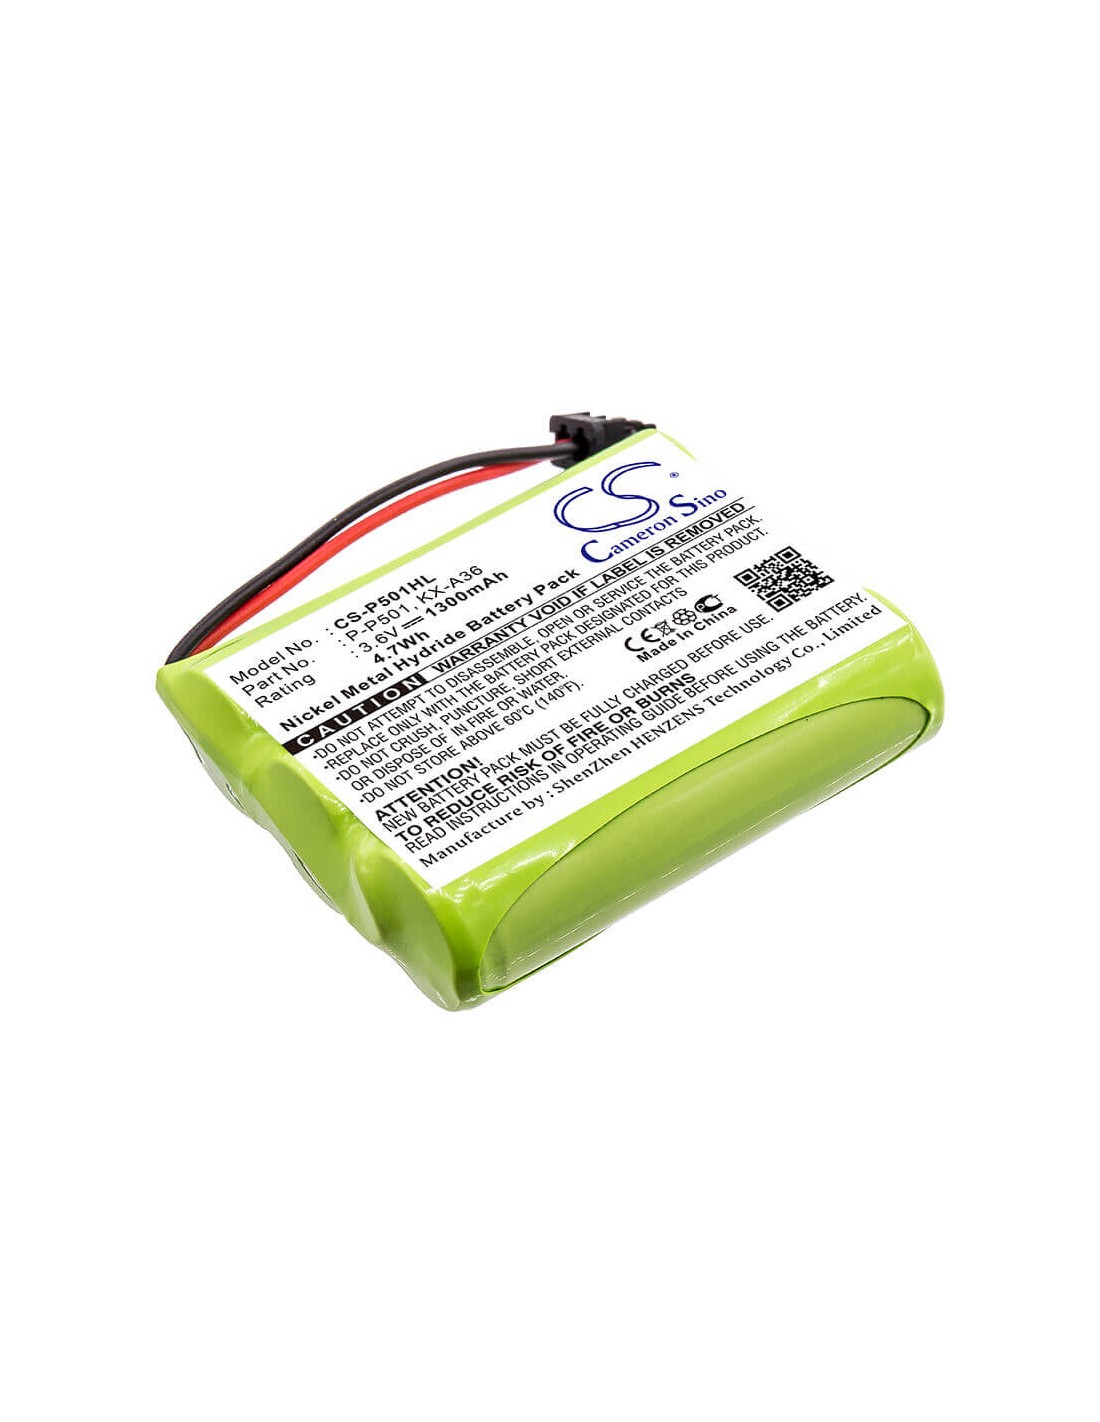 Battery for Sharp, 3600, Cl100w, Cl200, Cl300, 3.6V, 1300mAh - 4.68Wh